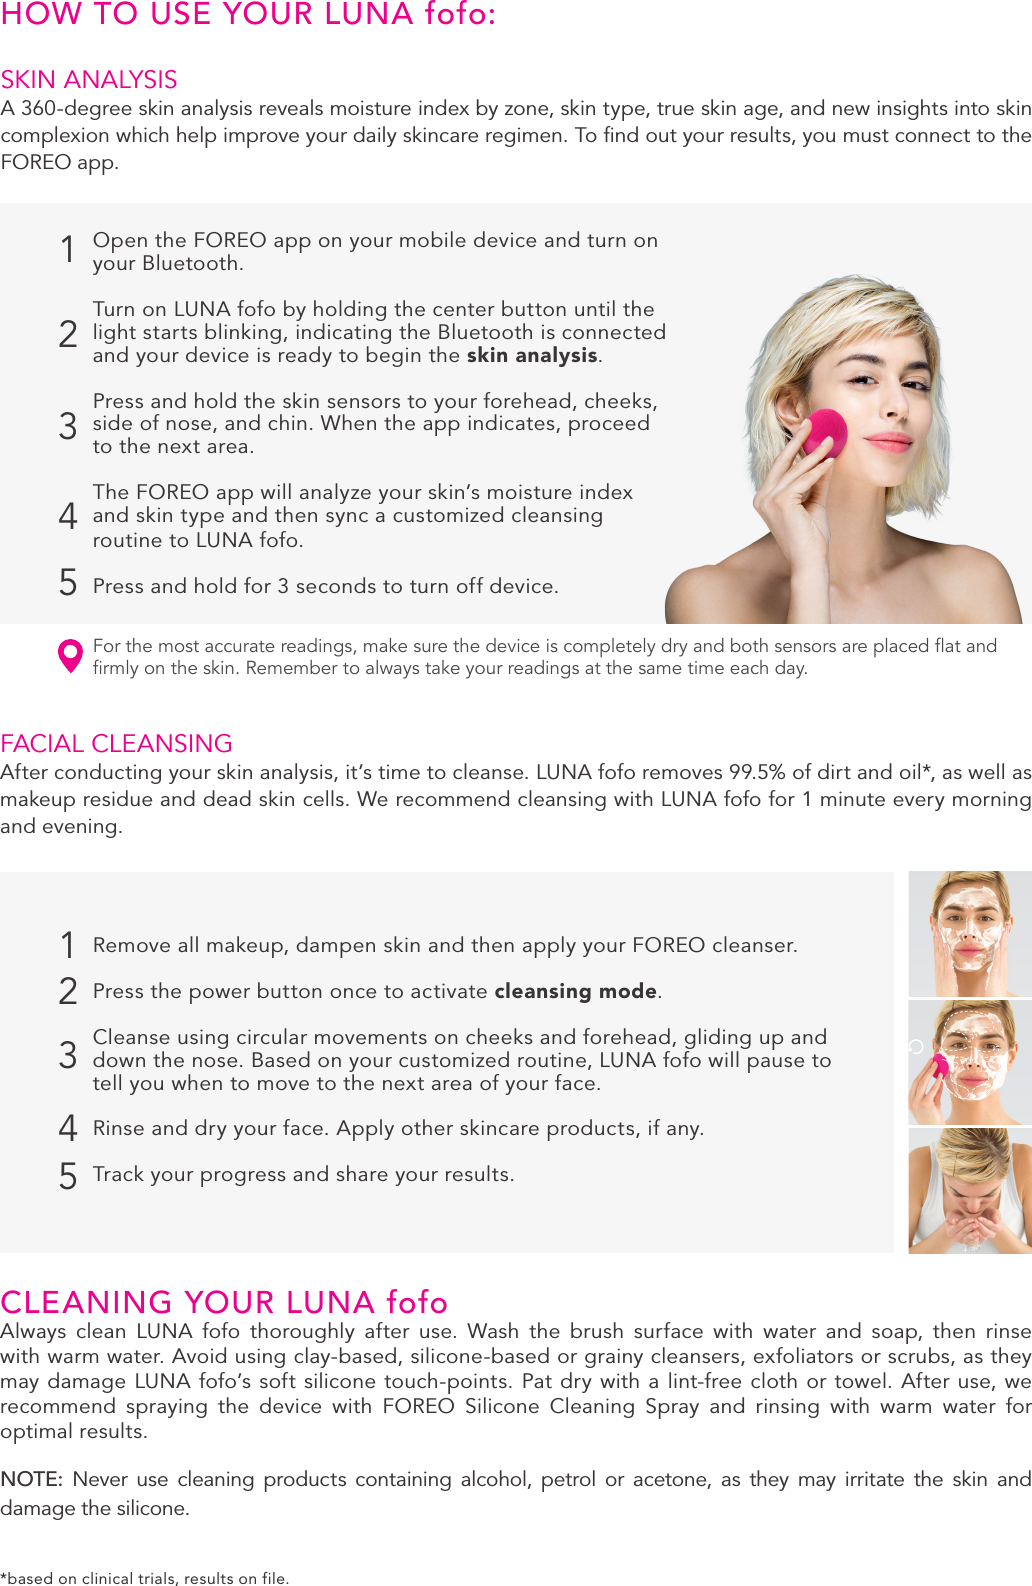 3SKIN ANALYSIS A 360-degree skin analysis reveals moisture index by zone, skin type, true skin age, and new insights into skin complexion which help improve your daily skincare regimen. To ﬁnd out your results, you must connect to the FOREO app.HOW TO USE YOUR LUNA fofo:12345FACIAL CLEANSINGAfter conducting your skin analysis, it’s time to cleanse. LUNA fofo removes 99.5% of dirt and oil*, as well as makeup residue and dead skin cells. We recommend cleansing with LUNA fofo for 1 minute every morning and evening.12345For the most accurate readings, make sure the device is completely dry and both sensors are placed at and rmly on the skin. Remember to always take your readings at the same time each day. CLEANING YOUR LUNA fofoAlways clean LUNA fofo thoroughly after use. Wash the brush surface with water and soap, then rinse with warm water. Avoid using clay-based, silicone-based or grainy cleansers, exfoliators or scrubs, as they may damage LUNA fofo’s soft silicone touch-points. Pat dry with a lint-free cloth or towel. After use, we recommend spraying the device with FOREO Silicone Cleaning Spray and rinsing with warm water for optimal results.NOTE:  Never use cleaning products containing alcohol, petrol or acetone, as they may irritate the skin and damage the silicone.Open the FOREO app on your mobile device and turn on your Bluetooth.Turn on LUNA fofo by holding the center button until the light starts blinking, indicating the Bluetooth is connected and your device is ready to begin the skin analysis.Press and hold the skin sensors to your forehead, cheeks, side of nose, and chin. When the app indicates, proceed to the next area.The FOREO app will analyze your skin’s moisture index and skin type and then sync a customized cleansing routine to LUNA fofo. Press and hold for 3 seconds to turn off device.Remove all makeup, dampen skin and then apply your FOREO cleanser.Press the power button once to activate cleansing mode. Cleanse using circular movements on cheeks and forehead, gliding up and down the nose. Based on your customized routine, LUNA fofo will pause to tell you when to move to the next area of your face.Rinse and dry your face. Apply other skincare products, if any.Track your progress and share your results.*based on clinical trials, results on file.